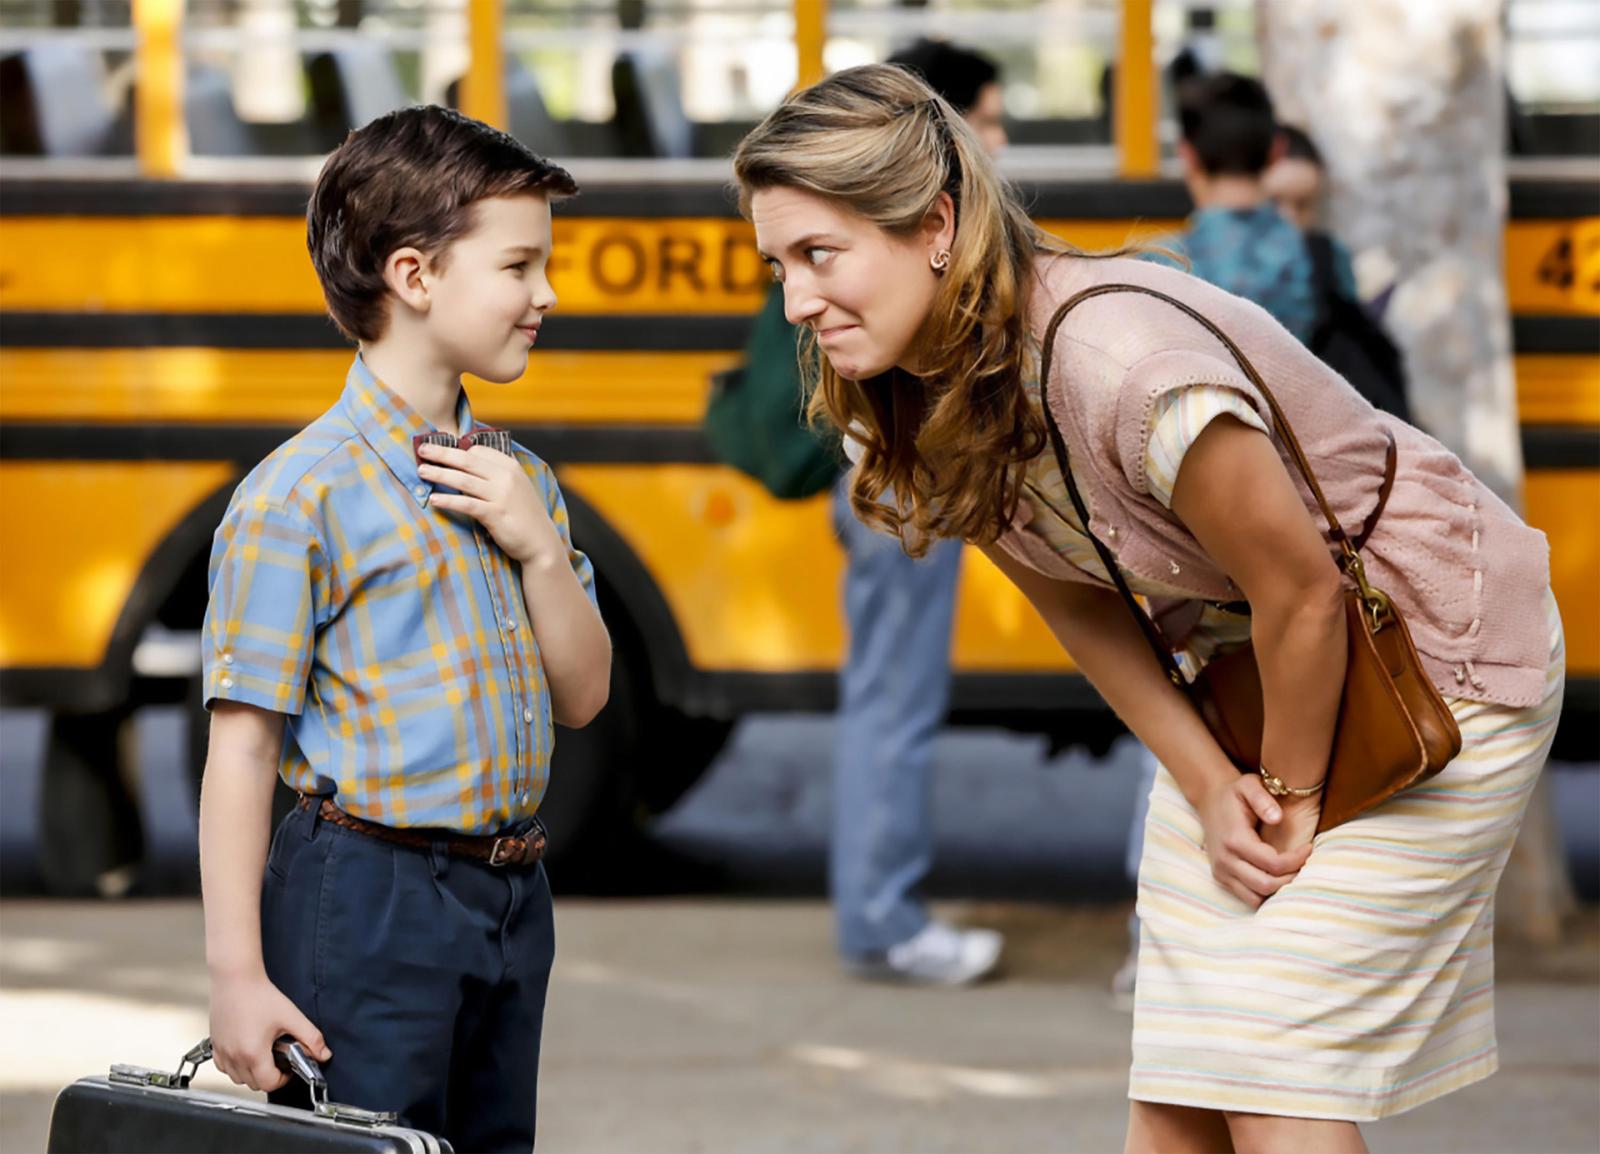 Young Sheldon Fans Suggest Georgie and Missy Are As Smart As Sheldon - image 1